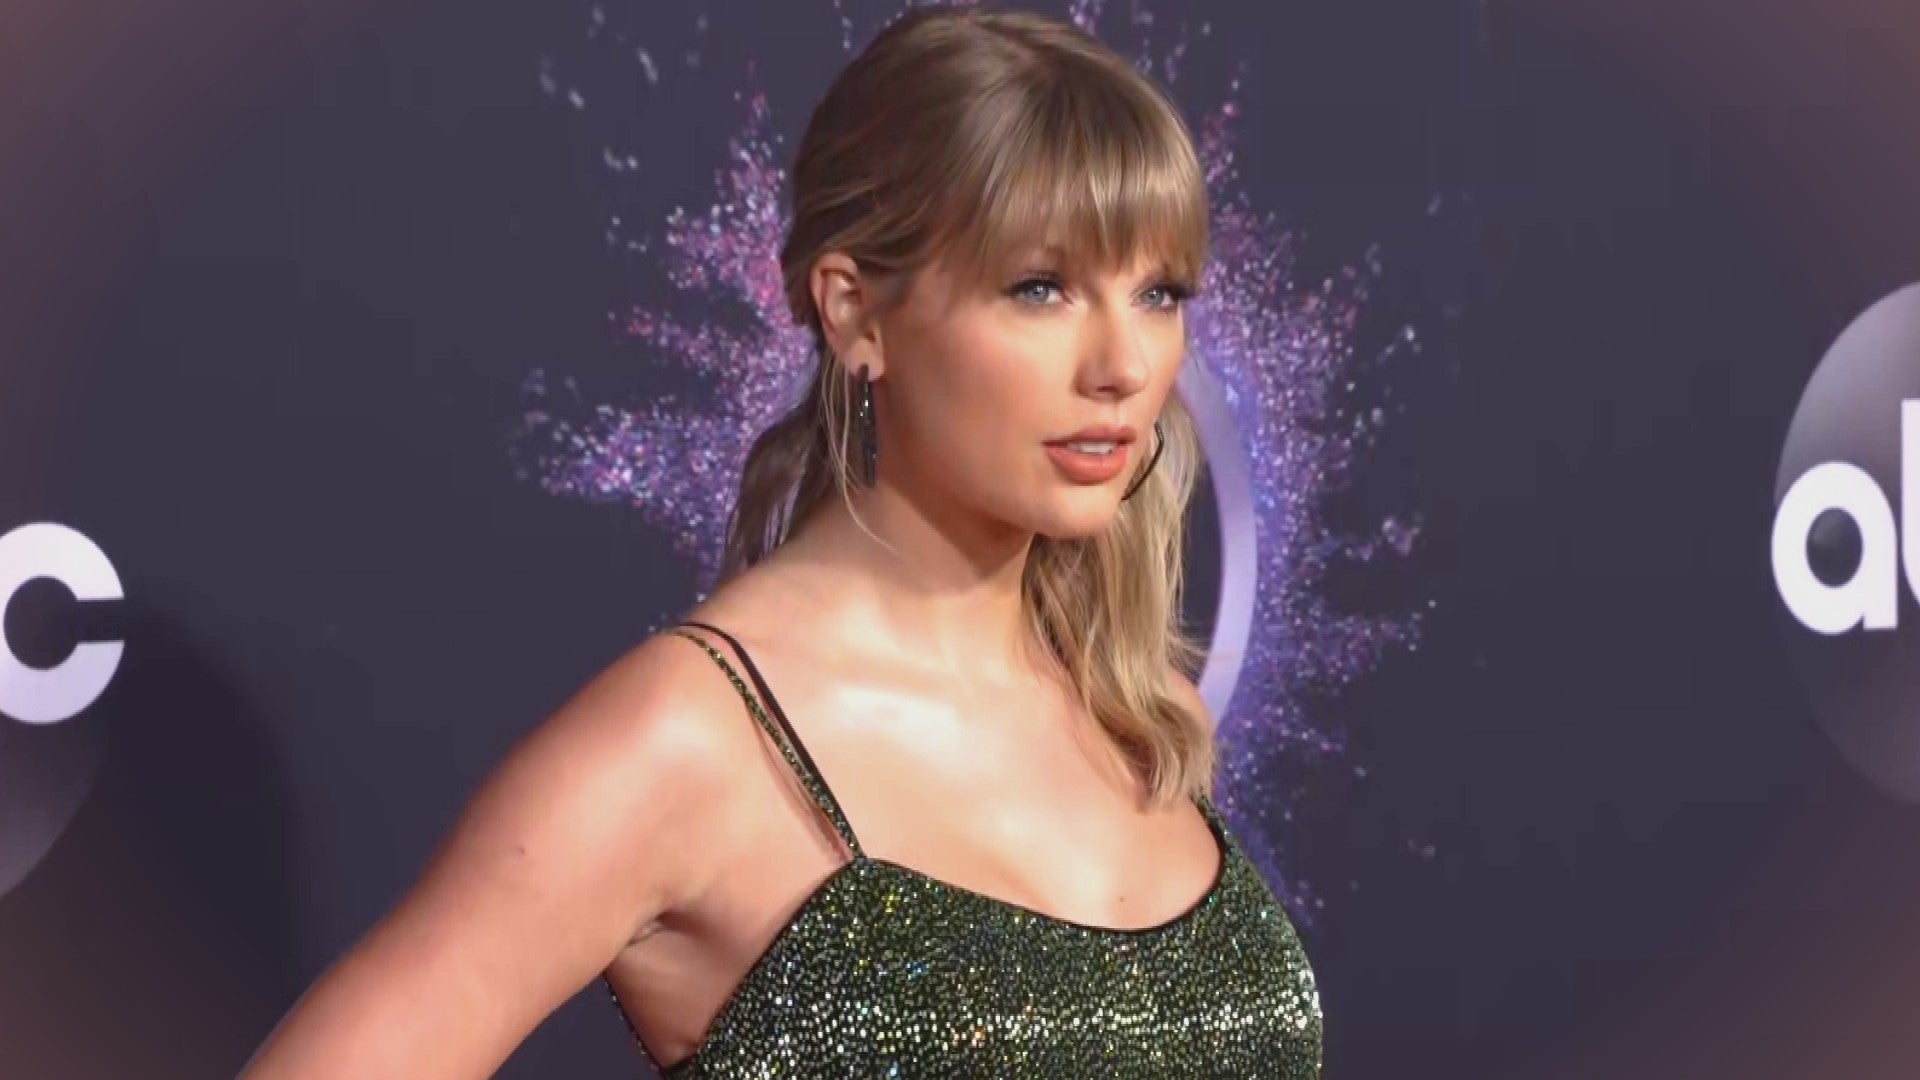 Taylor Swift Shines In Sparkly Green Dress Ahead Of 2019